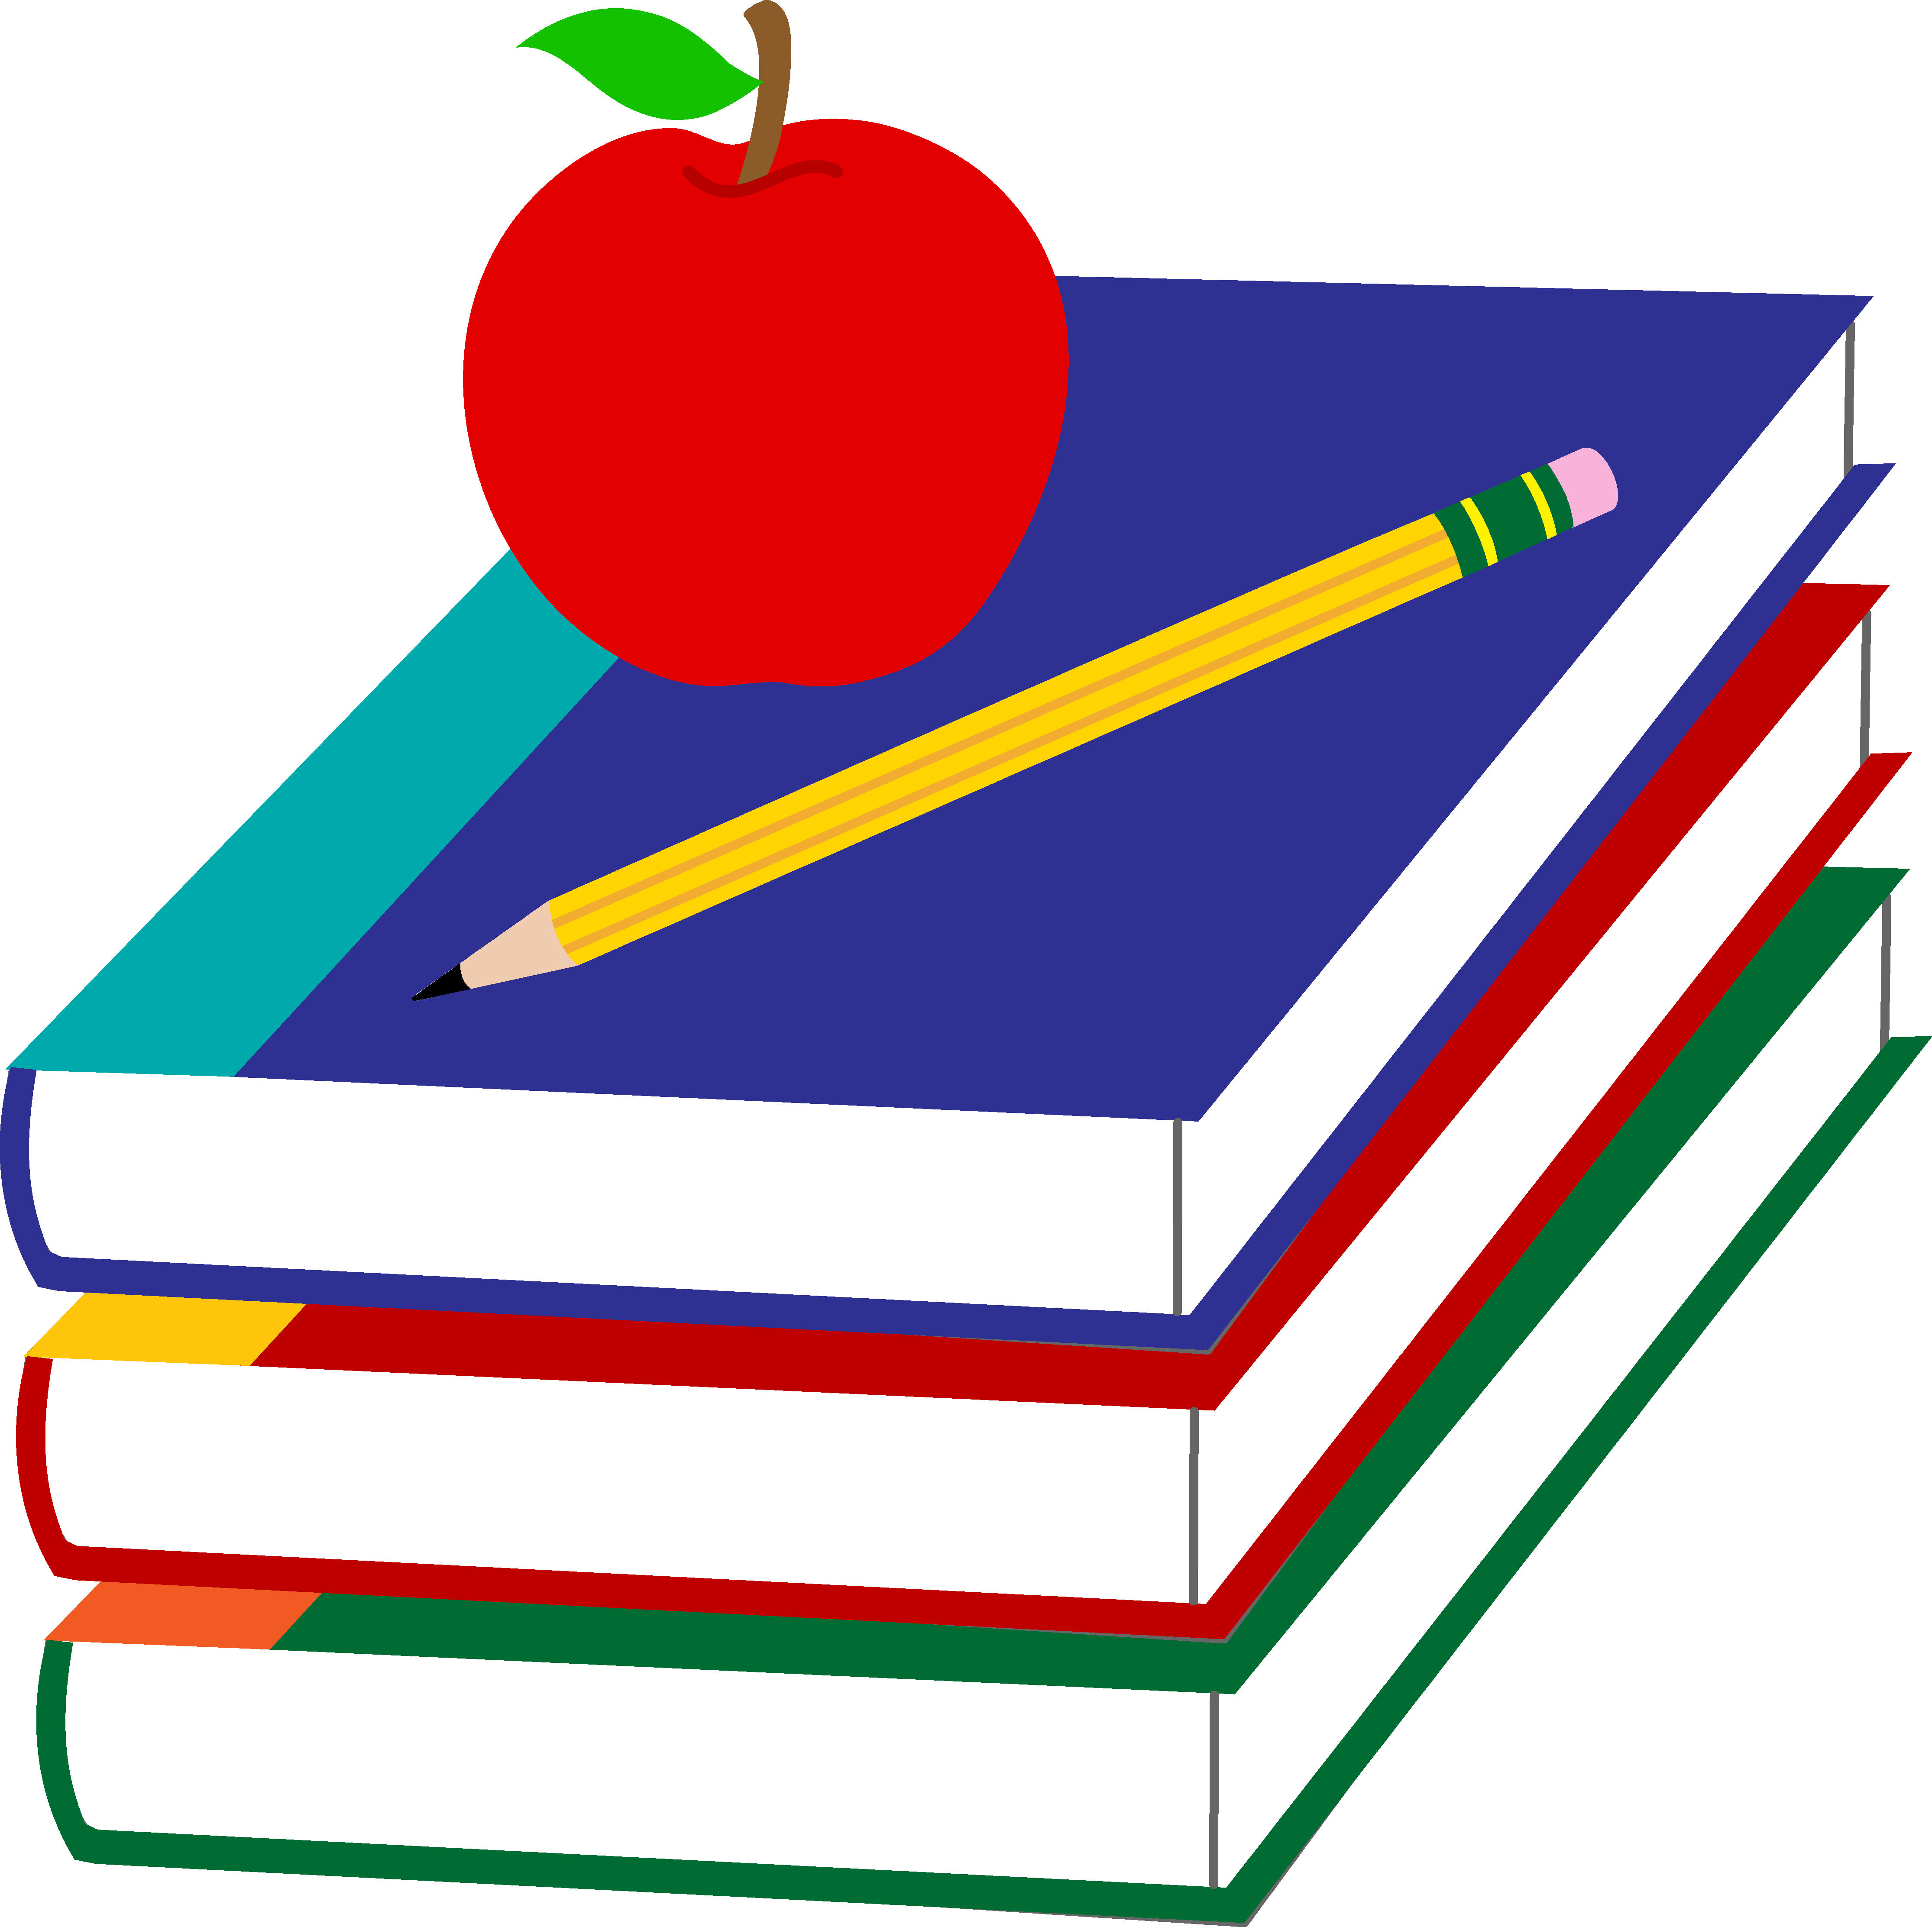 School Books With Apple and Pencil - Free Clip Art